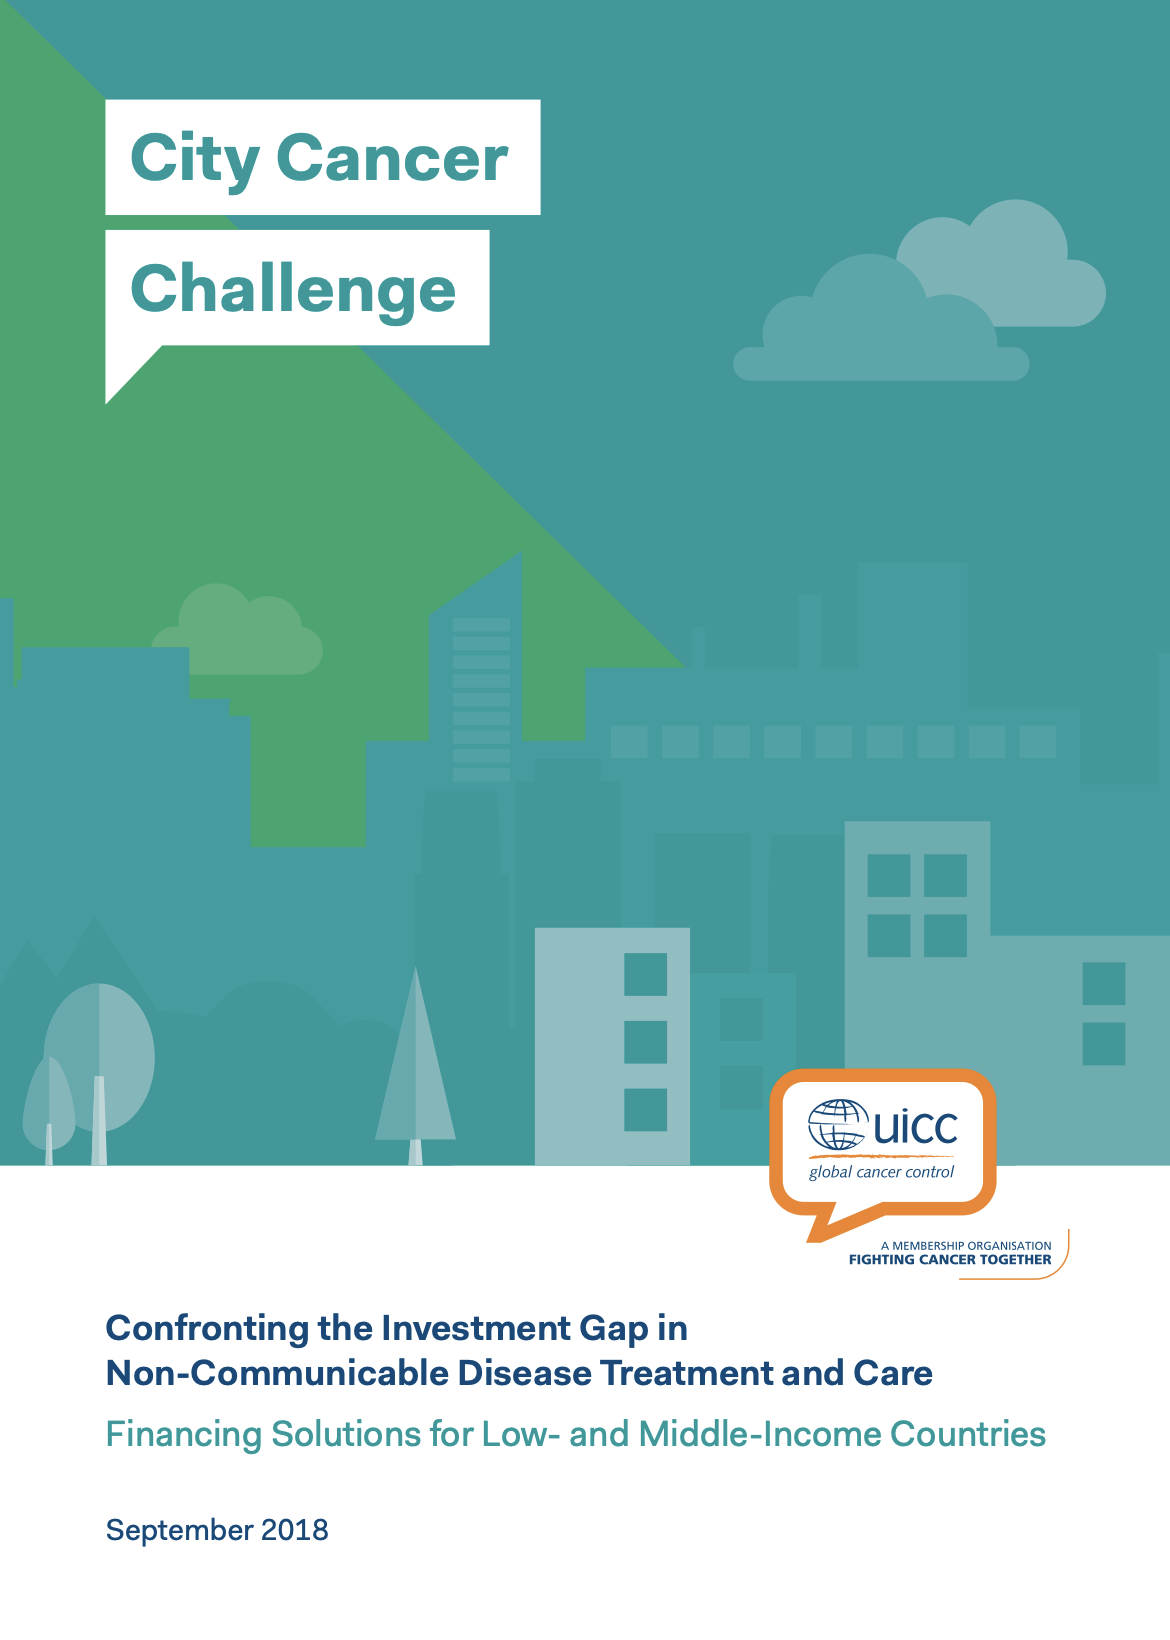 Confronting the Investment Gap in Non-Communicable Disease Treatment and Care